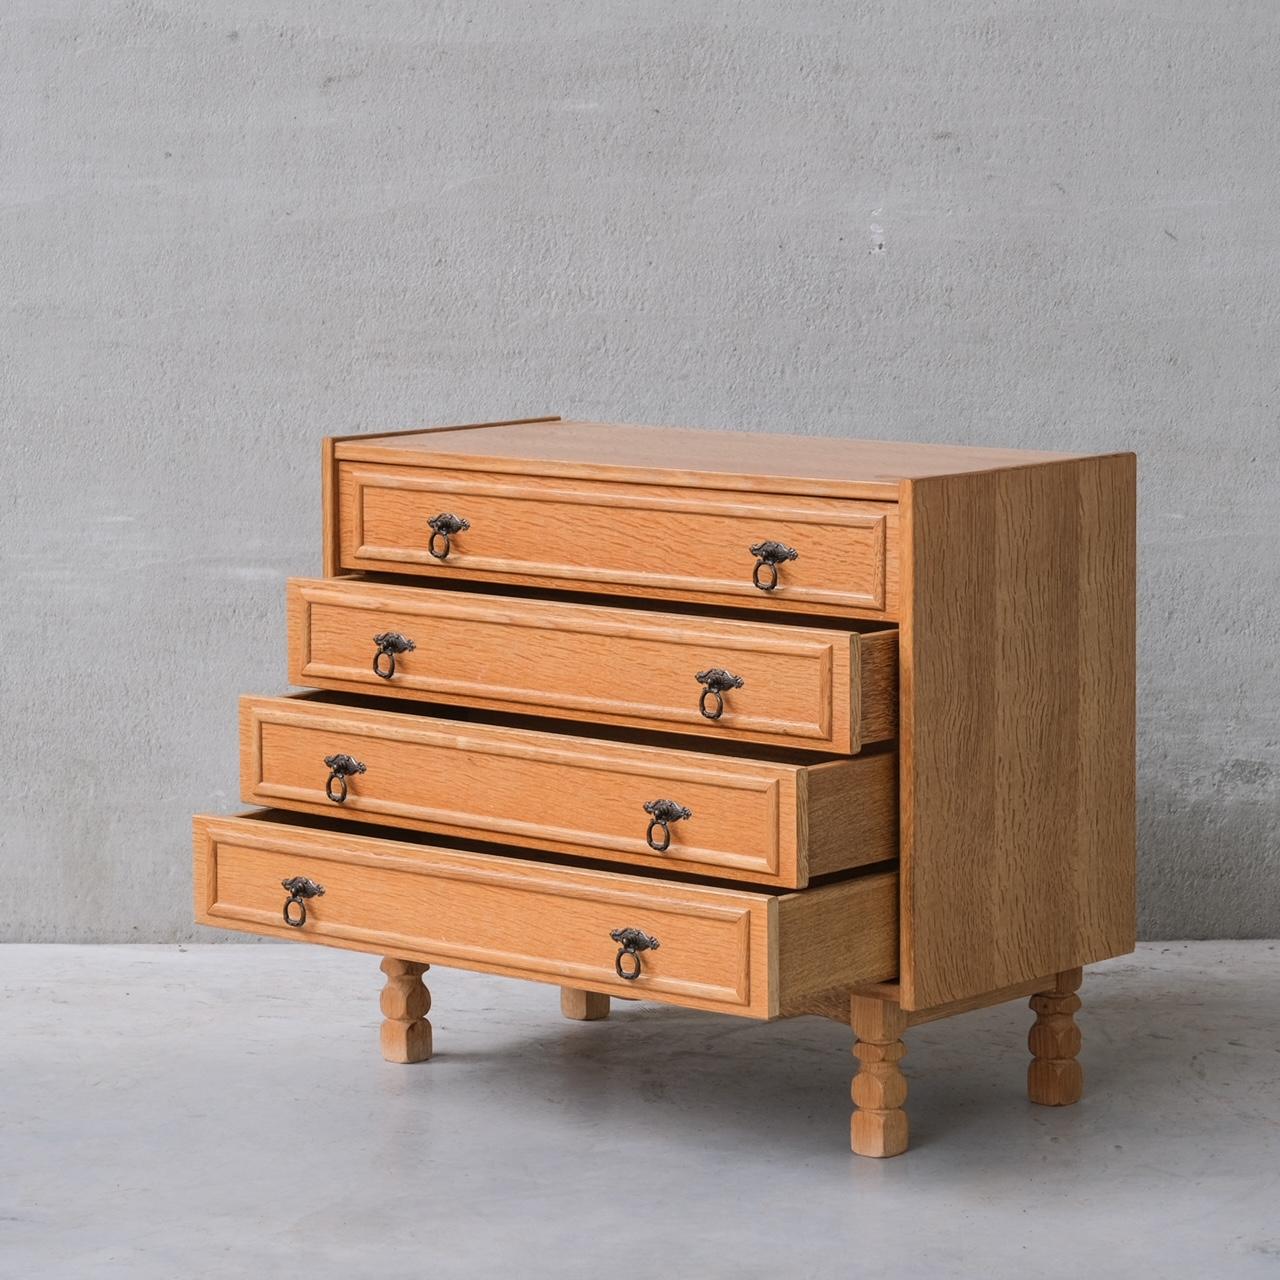 A single blonde oak chest of drawers.

Denmark, c1960s.

Four drawers with dual handles, raised over turned legs.

Good vintage condition, some scuffs and wear commensurate with age.

Internal Ref: 5/9/23/023.

Location: Belgium